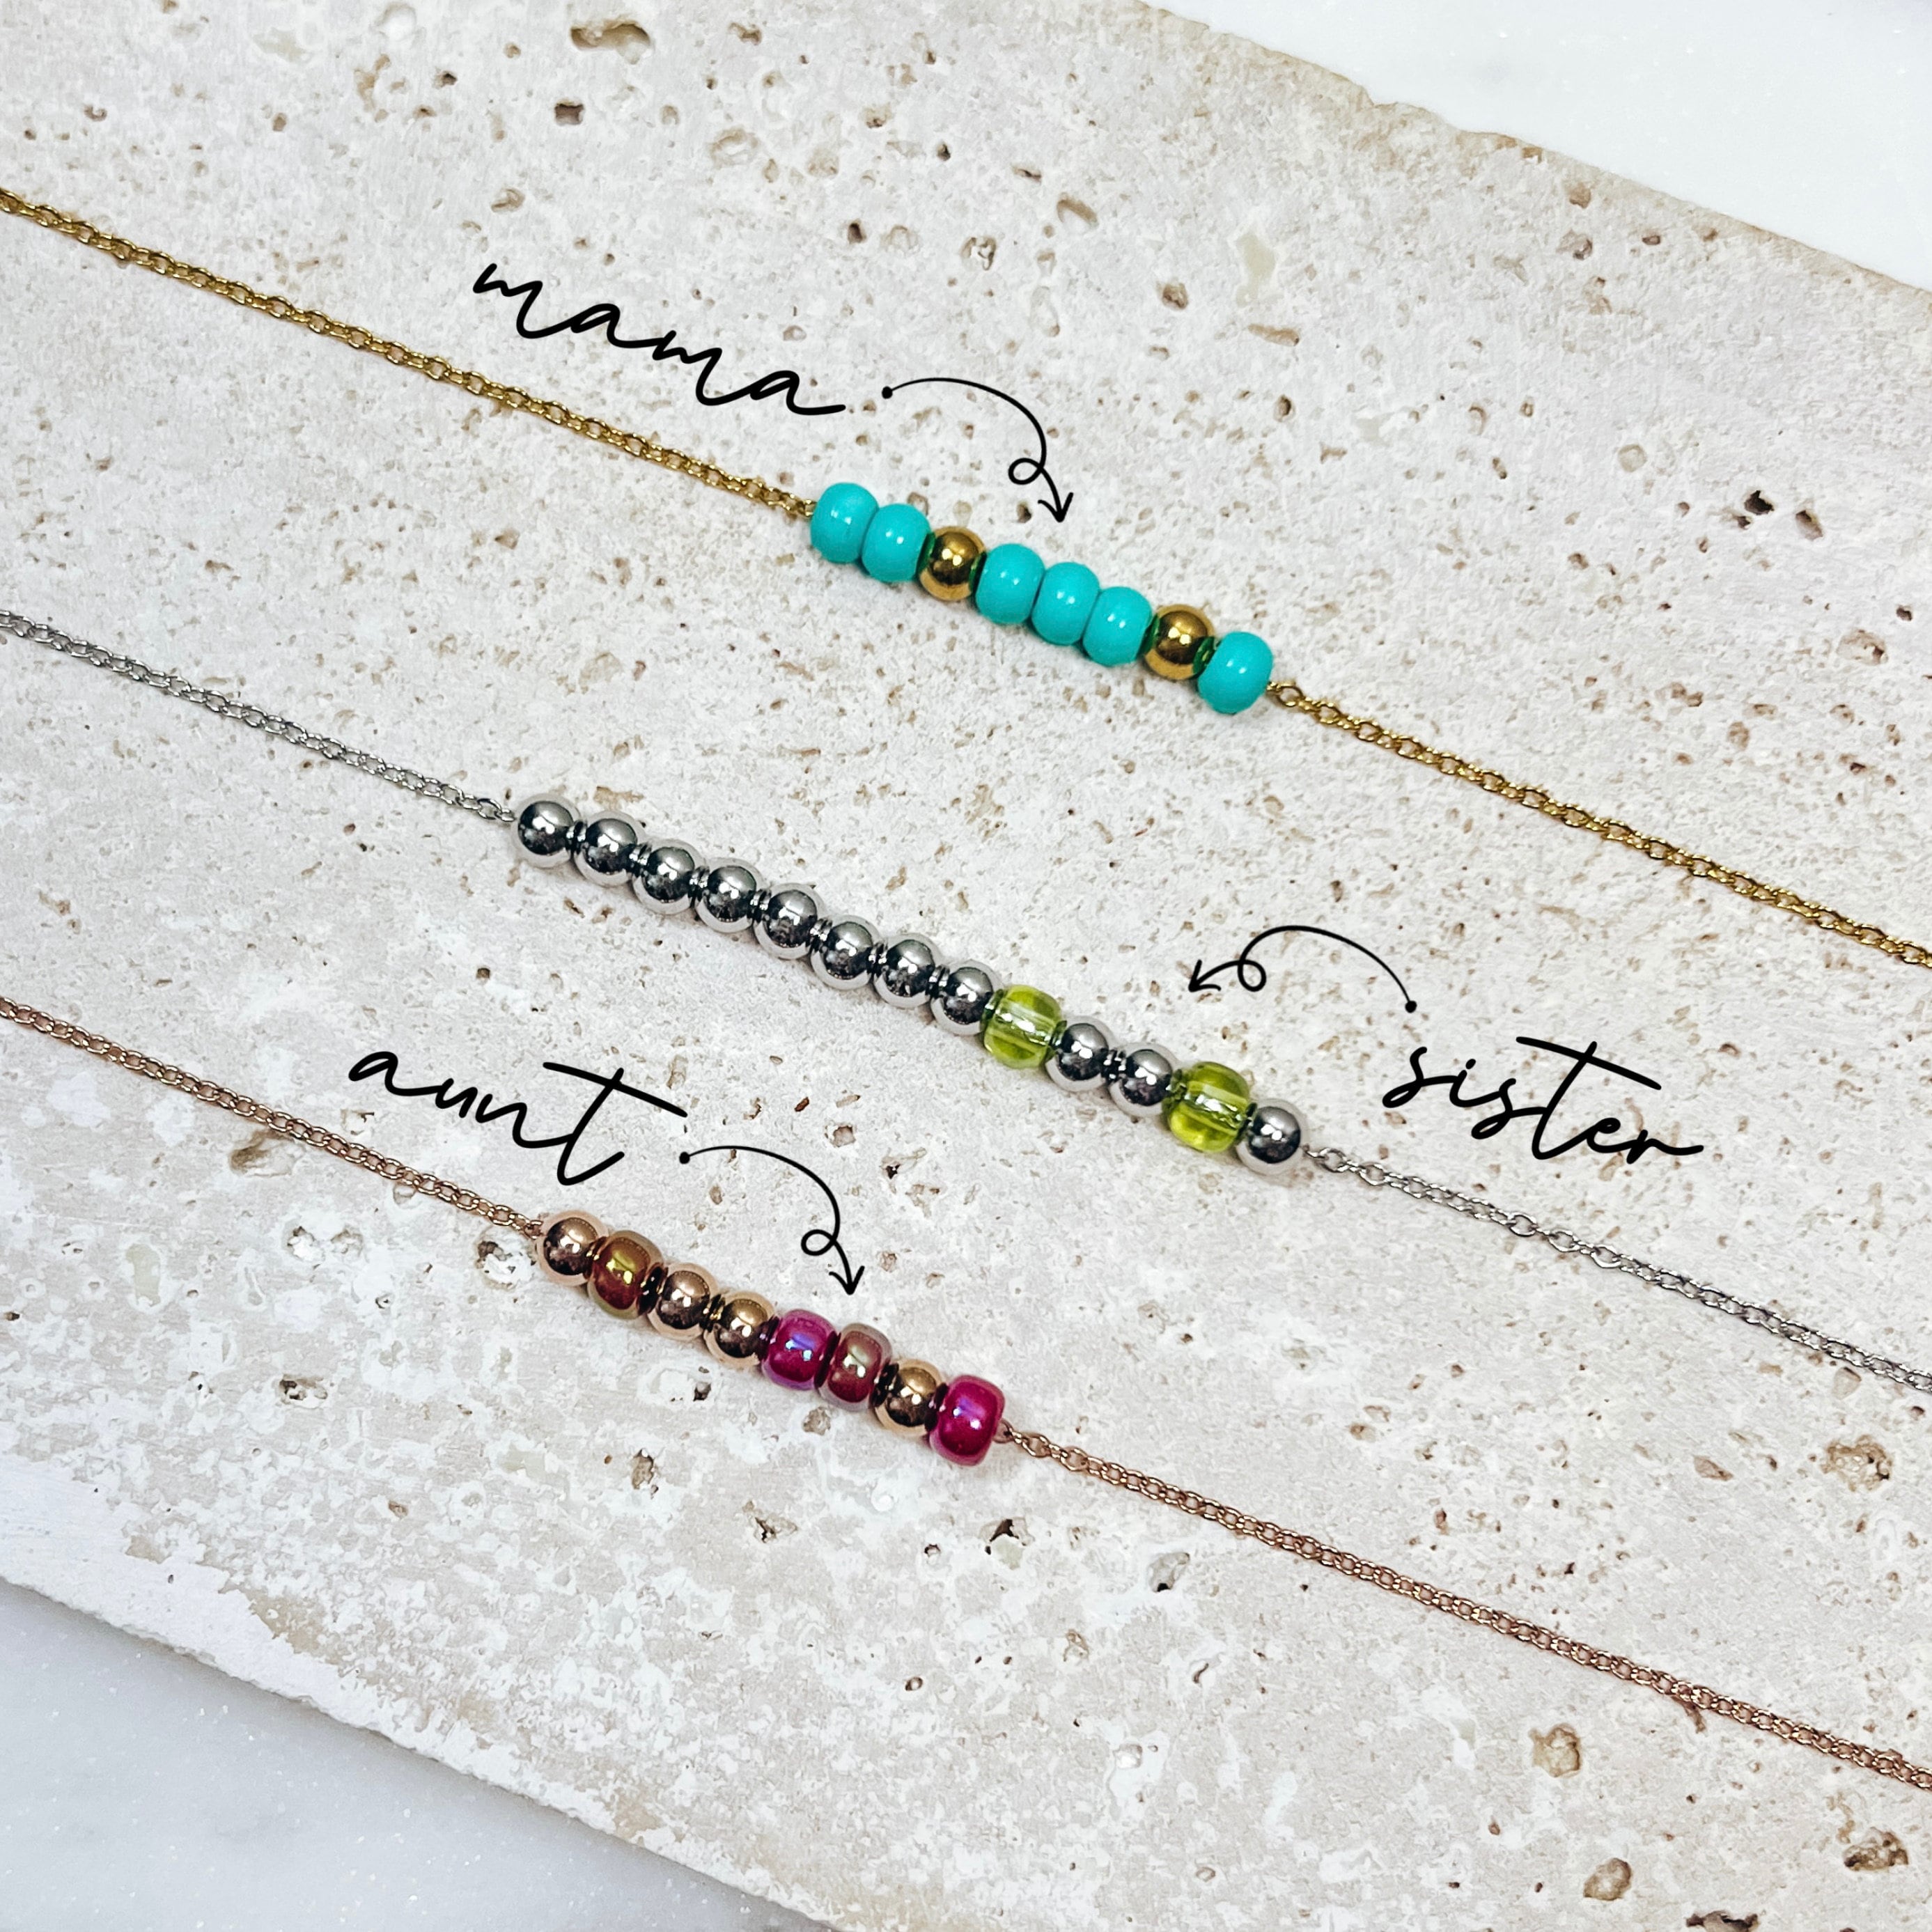 MORSE CODE BEADED NECKLACE